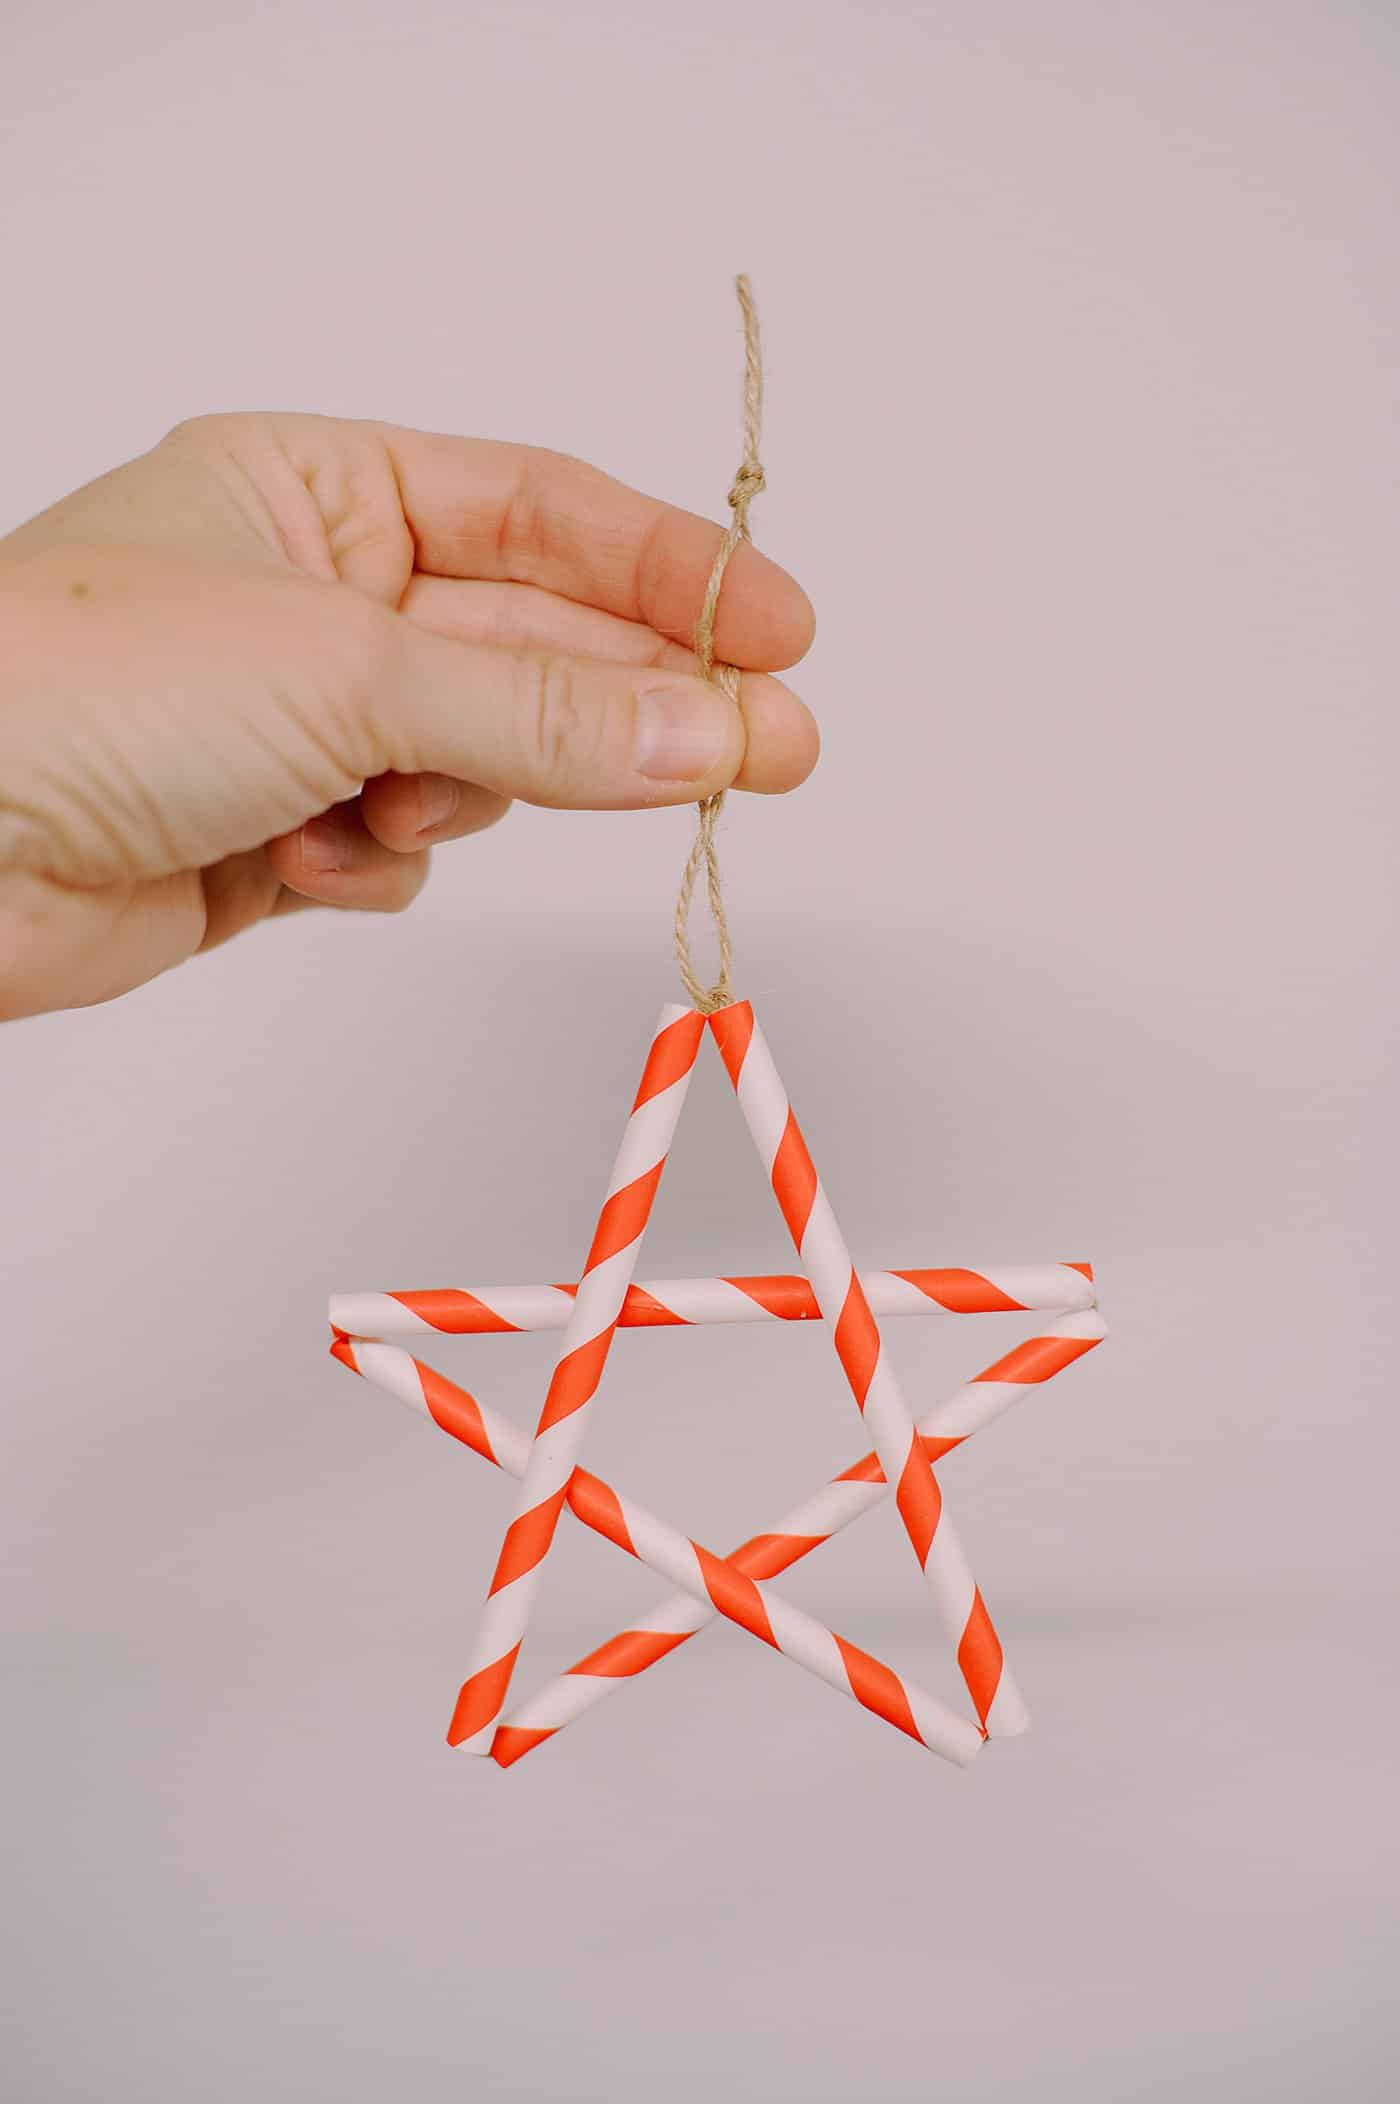 How to Make Drinking Straw Star Ornaments.